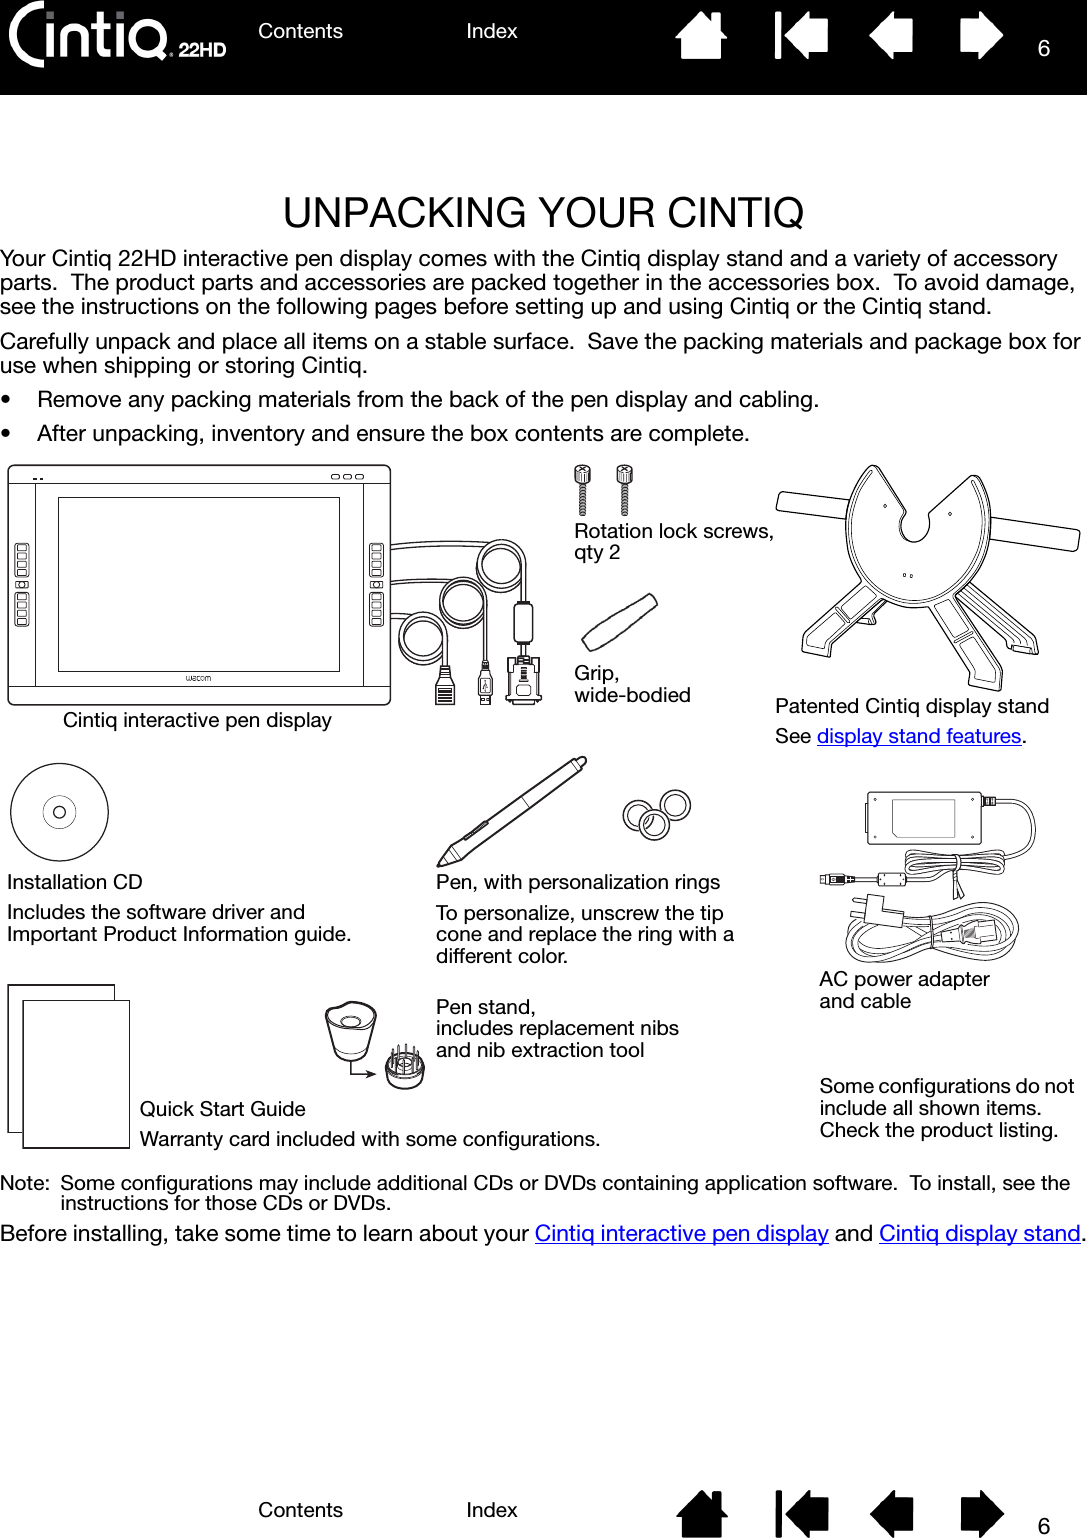 Contents IndexContents 6Index6UNPACKING YOUR CINTIQYour Cintiq 22HD interactive pen display comes with the Cintiq display stand and a variety of accessory parts.  The product parts and accessories are packed together in the accessories box.  To avoid damage, see the instructions on the following pages before setting up and using Cintiq or the Cintiq stand.Carefully unpack and place all items on a stable surface.  Save the packing materials and package box for use when shipping or storing Cintiq.• Remove any packing materials from the back of the pen display and cabling.• After unpacking, inventory and ensure the box contents are complete.Note:  Some configurations may include additional CDs or DVDs containing application software.  To install, see the instructions for those CDs or DVDs.  Before installing, take some time to learn about your Cintiq interactive pen display and Cintiq display stand.Cintiq interactive pen display Patented Cintiq display standSee display stand features.Pen, with personalization ringsTo personalize, unscrew the tip cone and replace the ring with a different color.Quick Start GuideWarranty card included with some configurations.Installation CDIncludes the software driver and Important Product Information guide.AC power adapter and cablePen stand, includes replacement nibs and nib extraction toolGrip, wide-bodiedSome configurations do not include all shown items.  Check the product listing.Rotation lock screws, qty 2